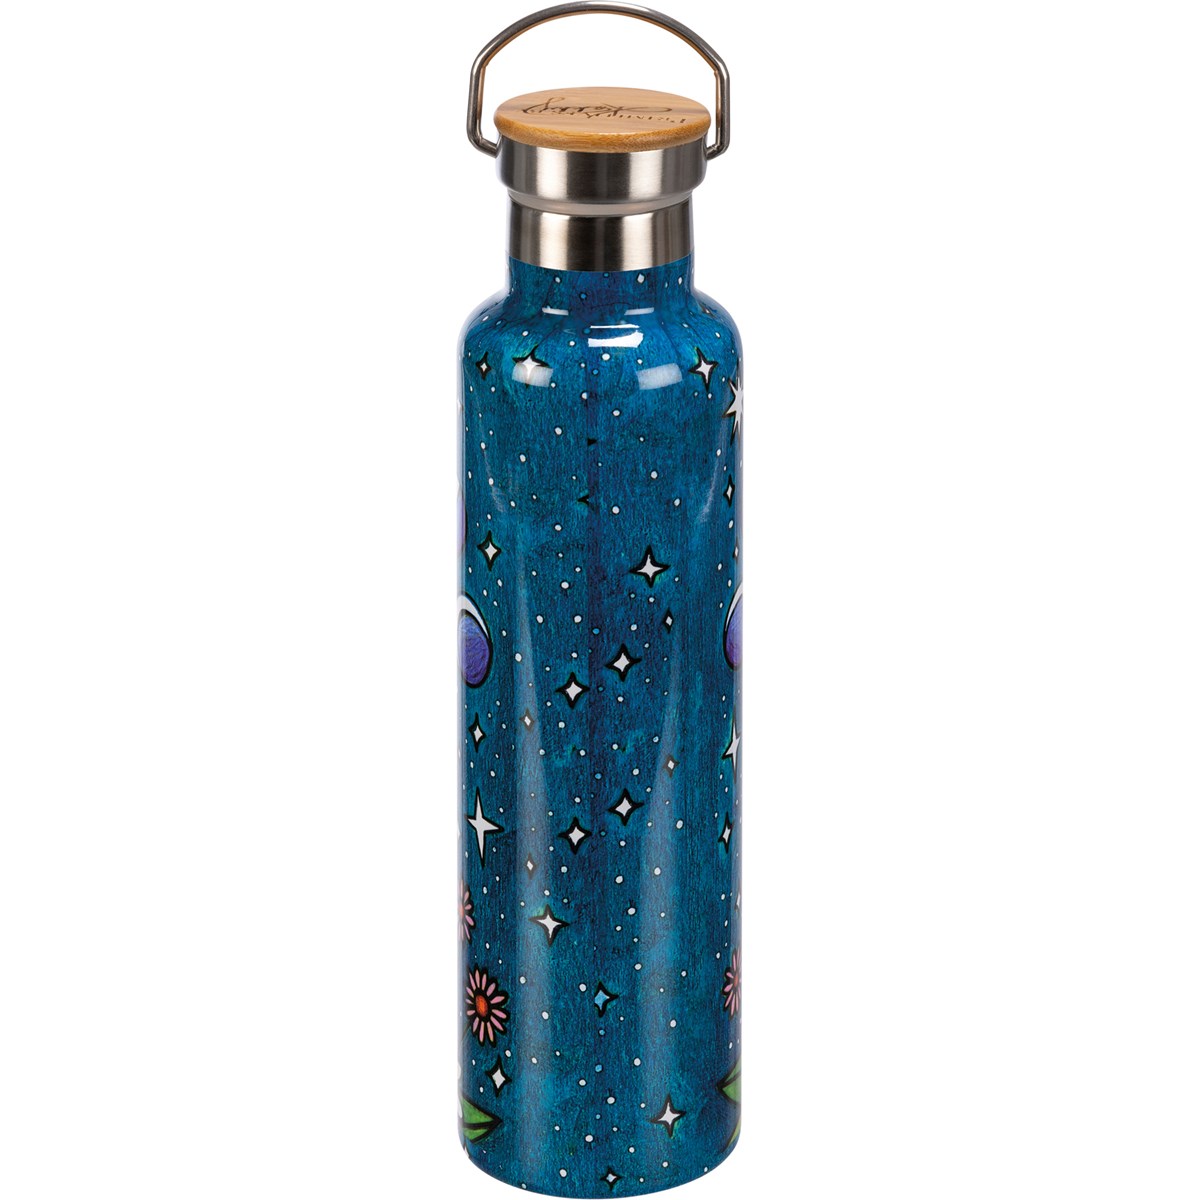 Reach For The Stars Insulated Bottle - Stainless Steel, Bamboo